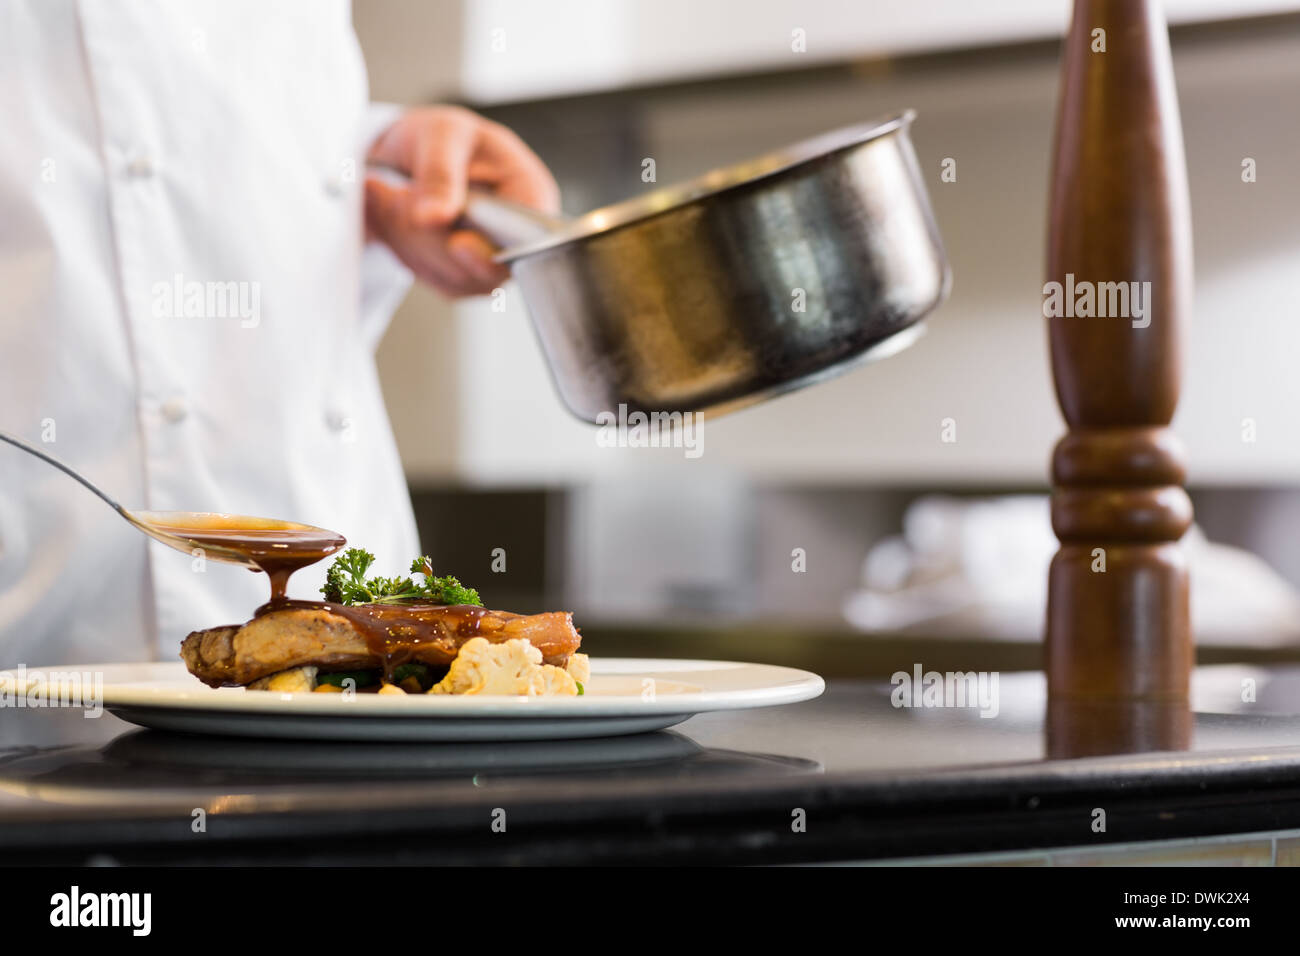 Closeup mid section of a chef garnishing food Stock Photo